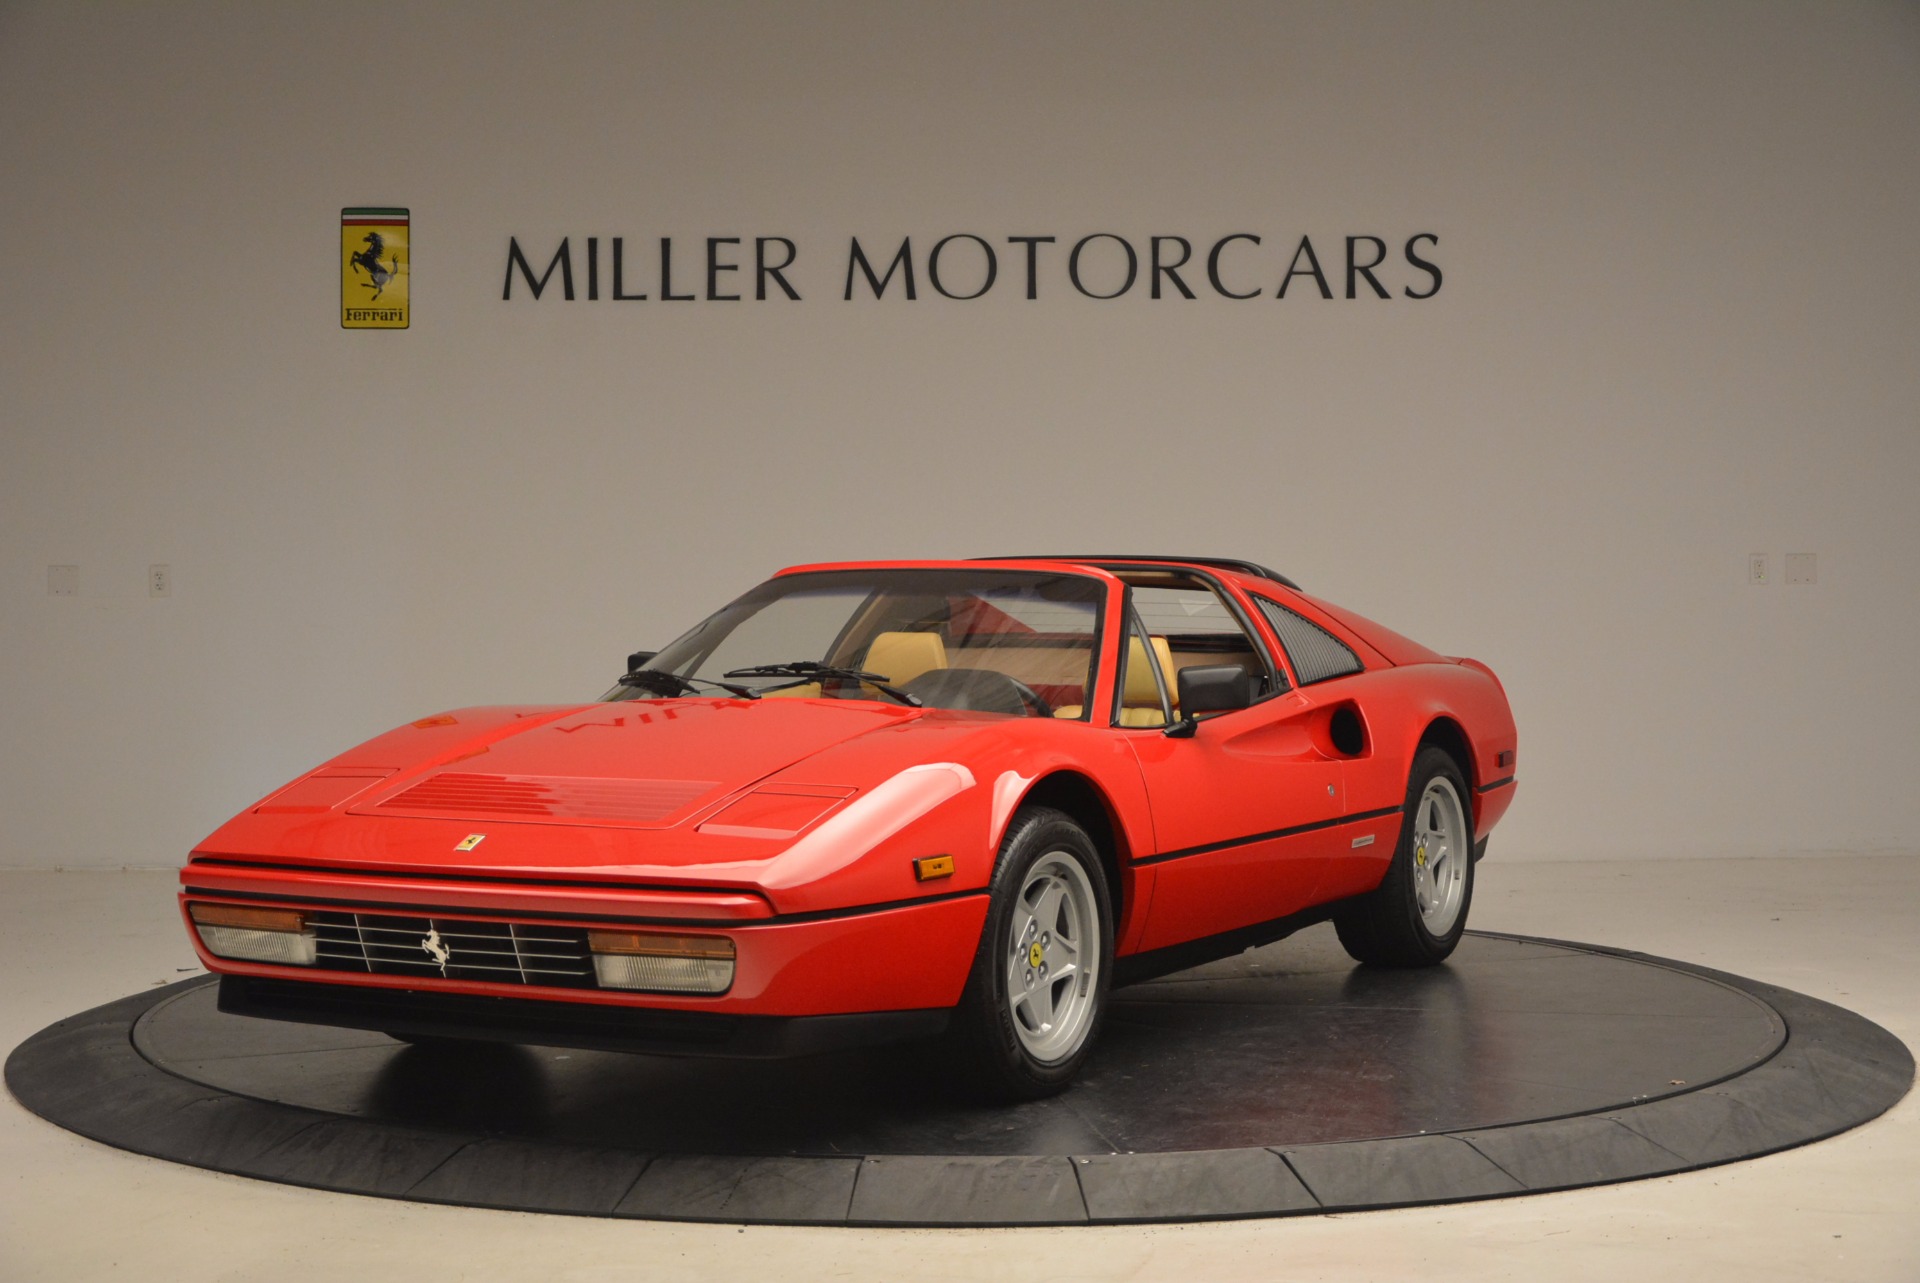 Used 1987 Ferrari 328 GTS for sale Sold at Rolls-Royce Motor Cars Greenwich in Greenwich CT 06830 1